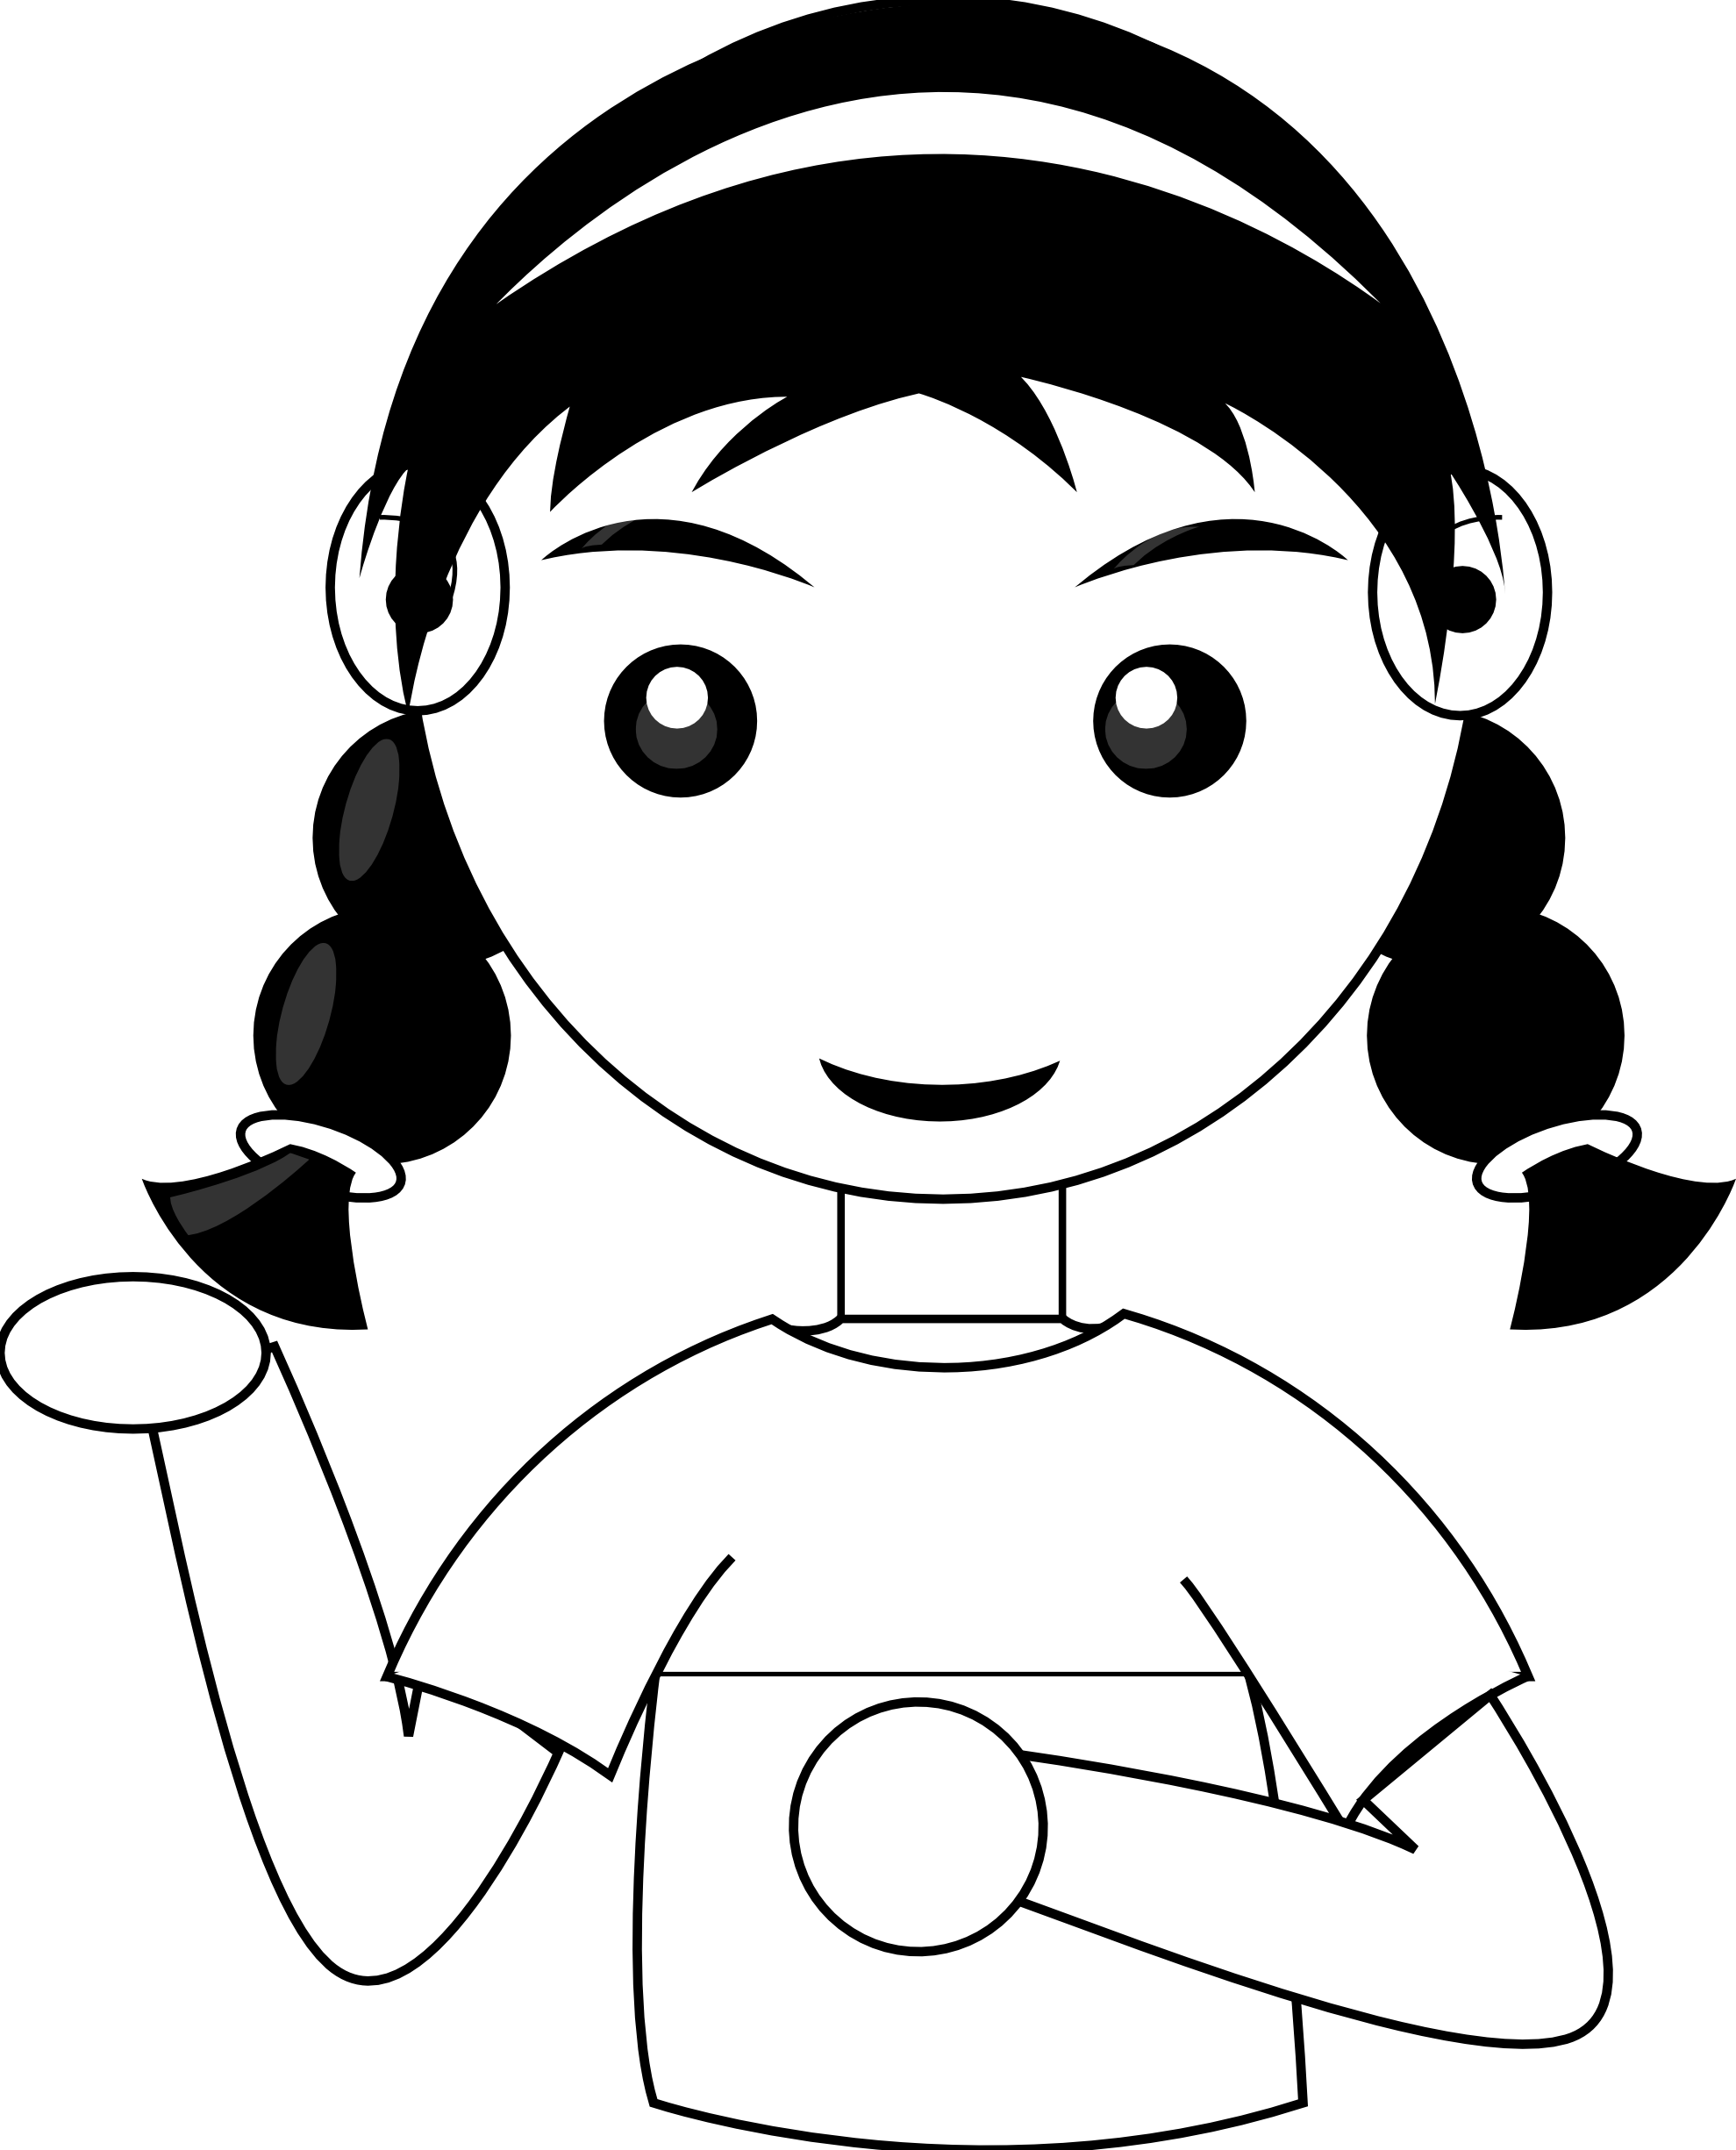 Female clipart black and white. Lips panda free images